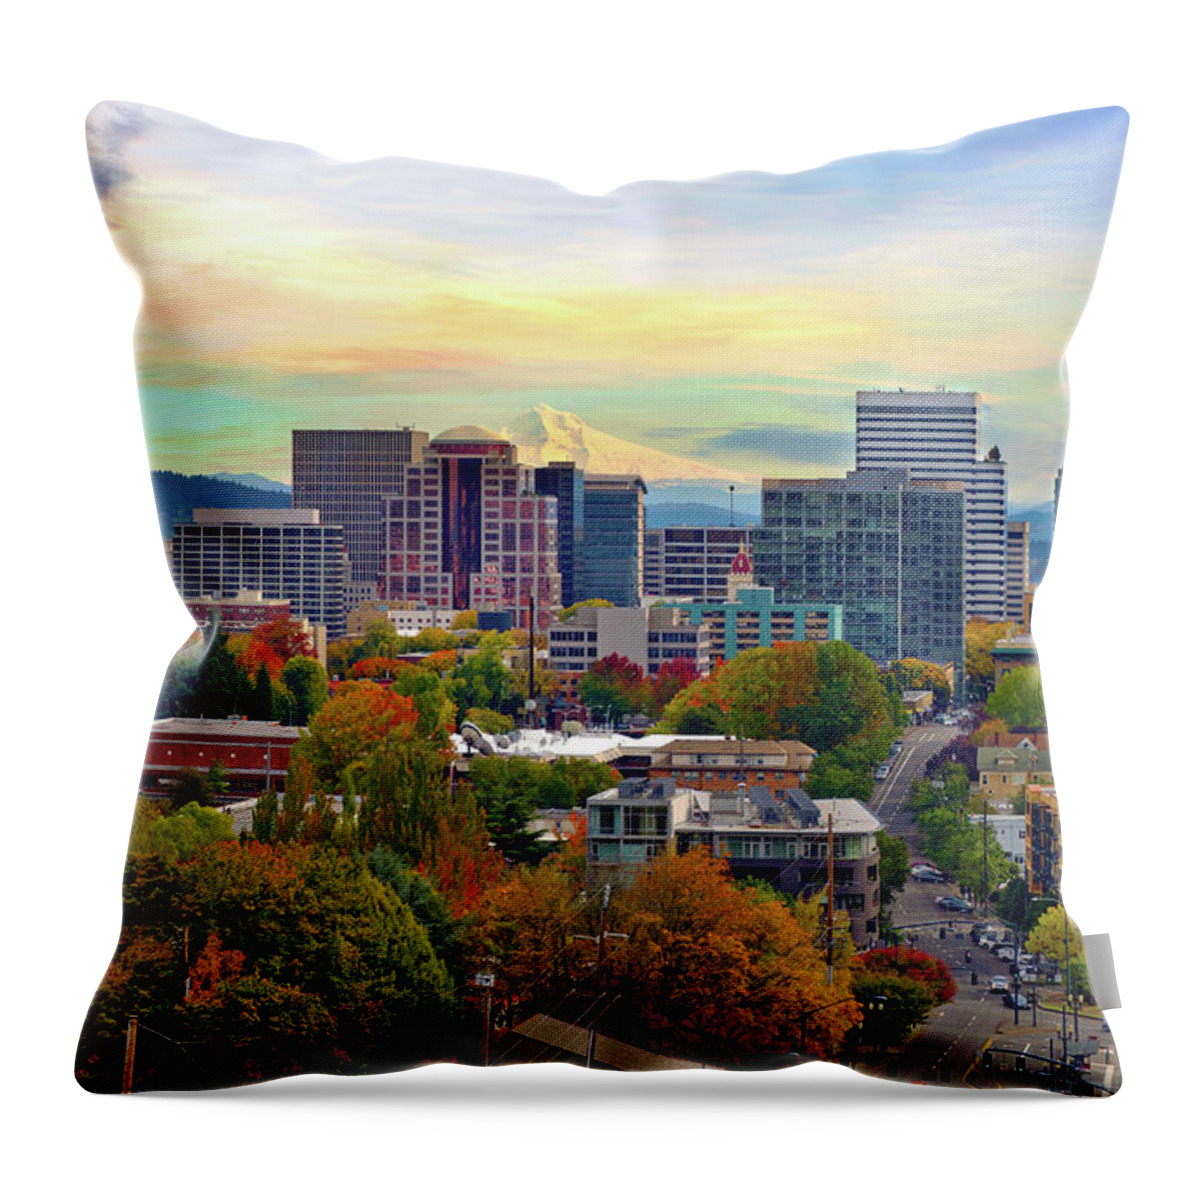 Viewpoint Throw Pillow featuring the photograph Portland Oregon Downtown Cityscape In by David Gn Photography